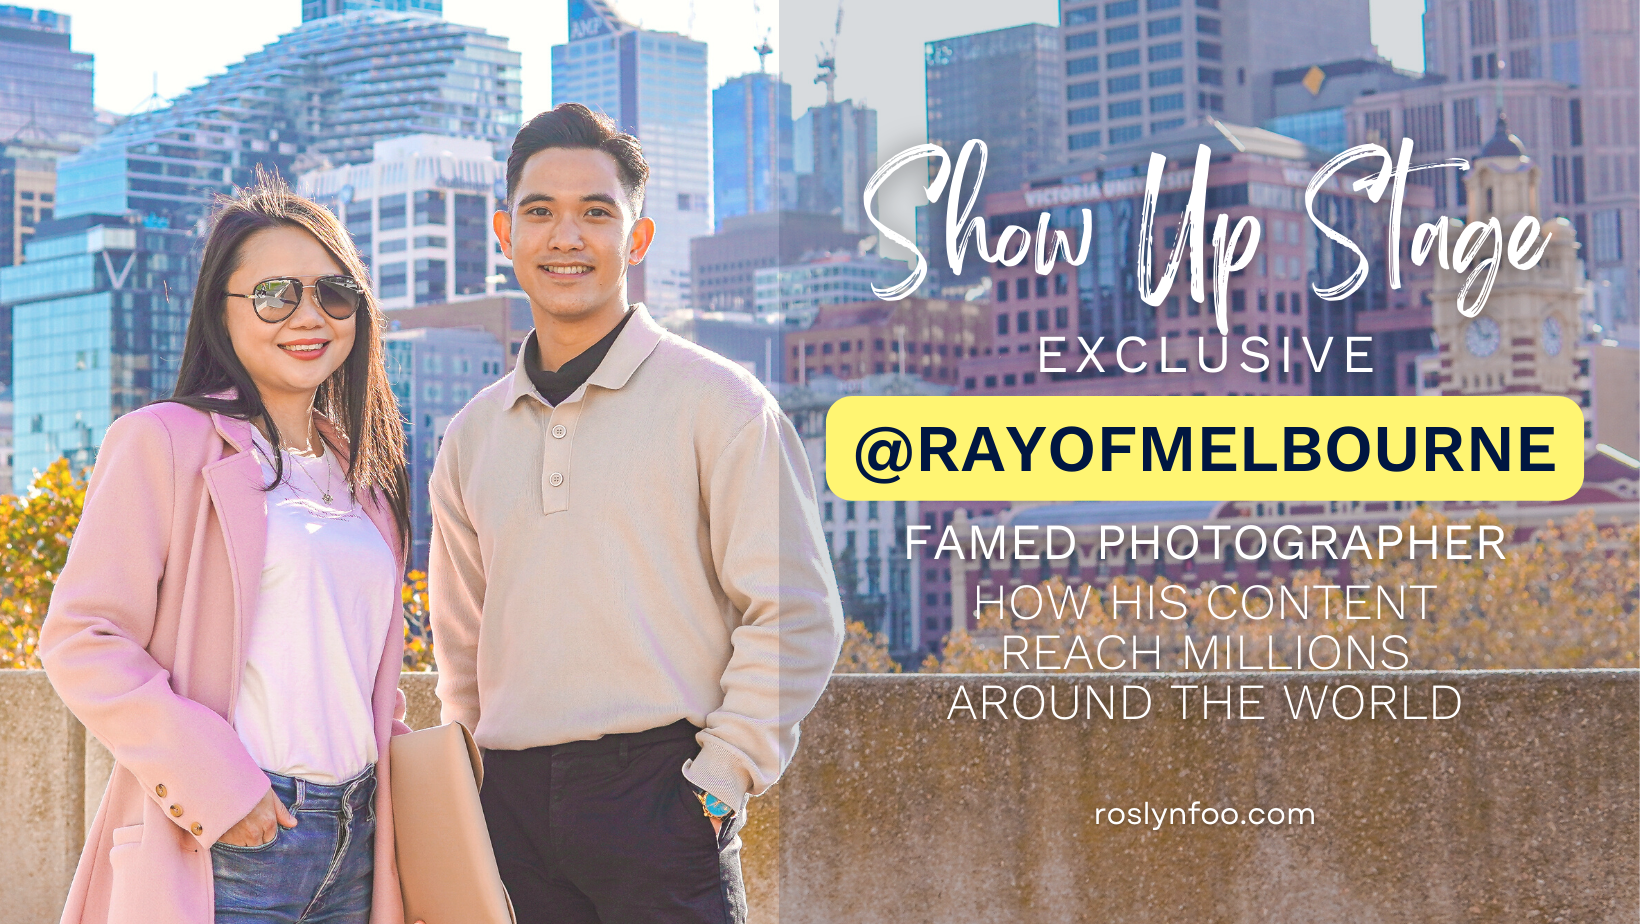 Ray of Melbourne Instagram Success - Exclusive Story of the Famed Photographer